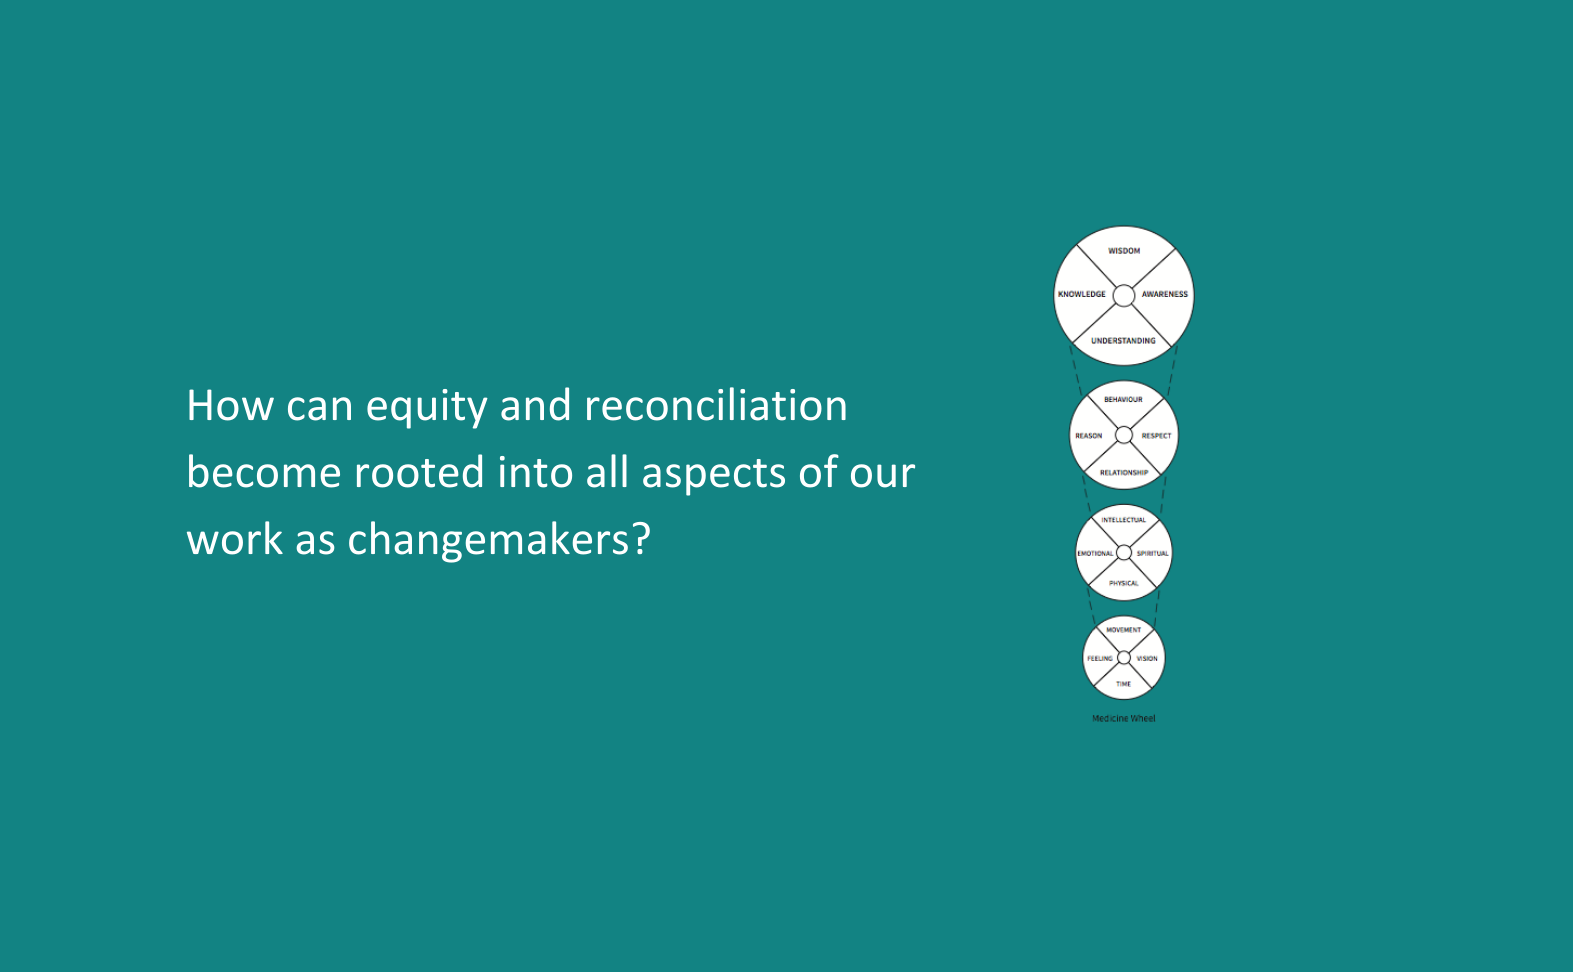 2020 Equity and Reconciliation (1) (1)